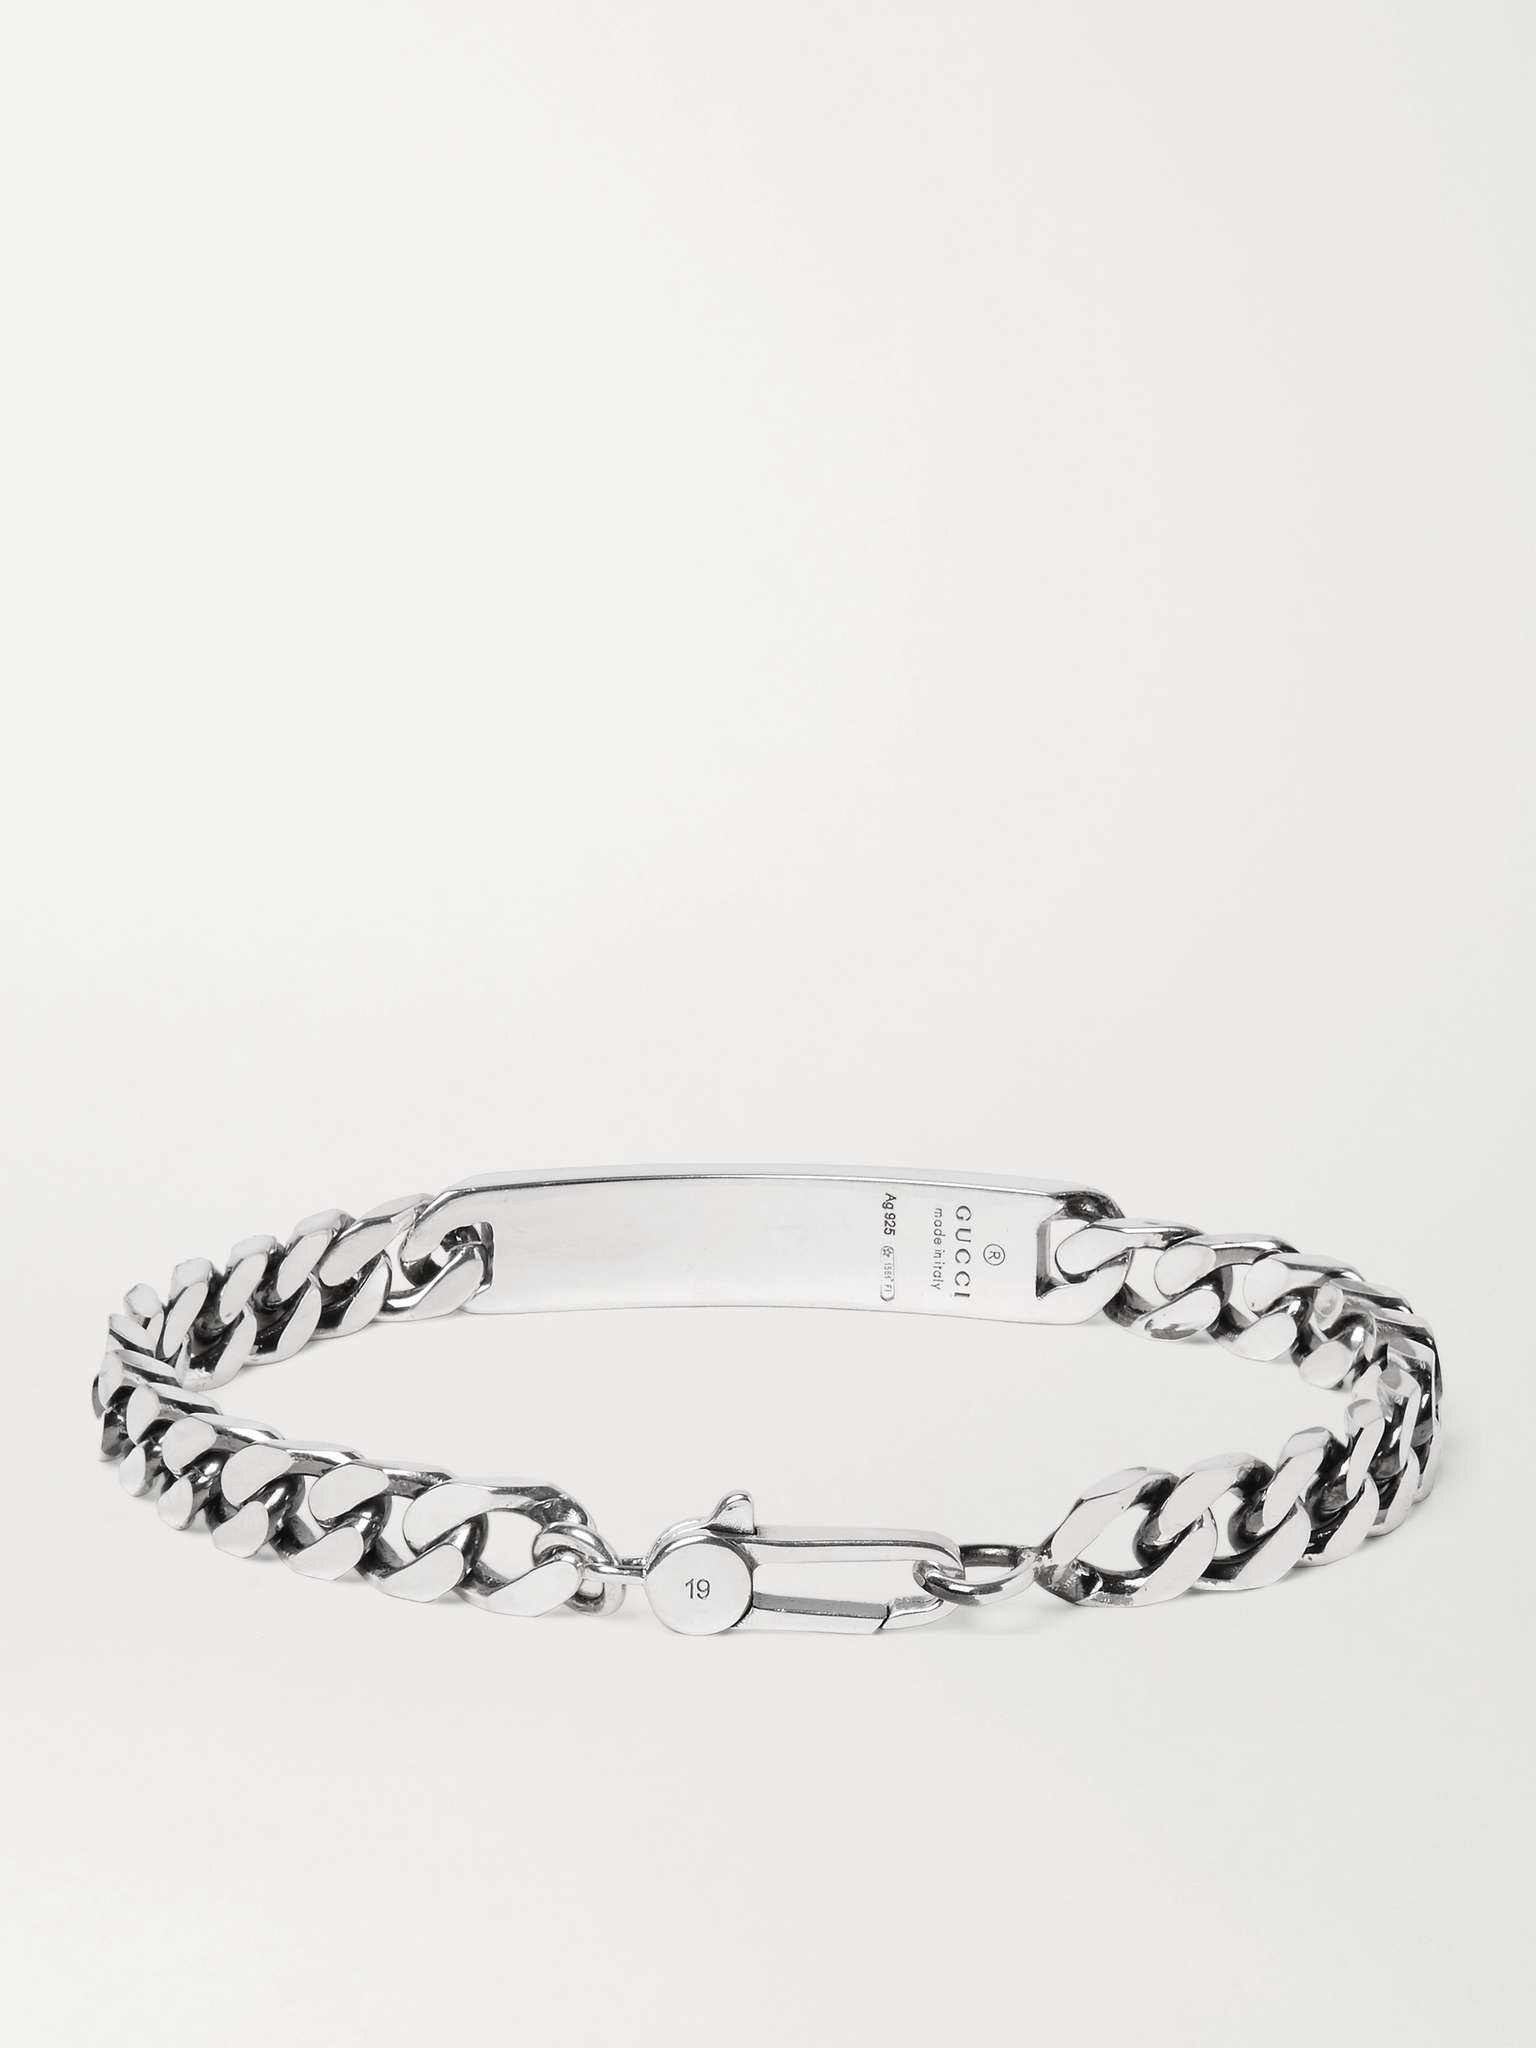 GucciGhost Engraved Sterling Silver ID Bracelet - 3